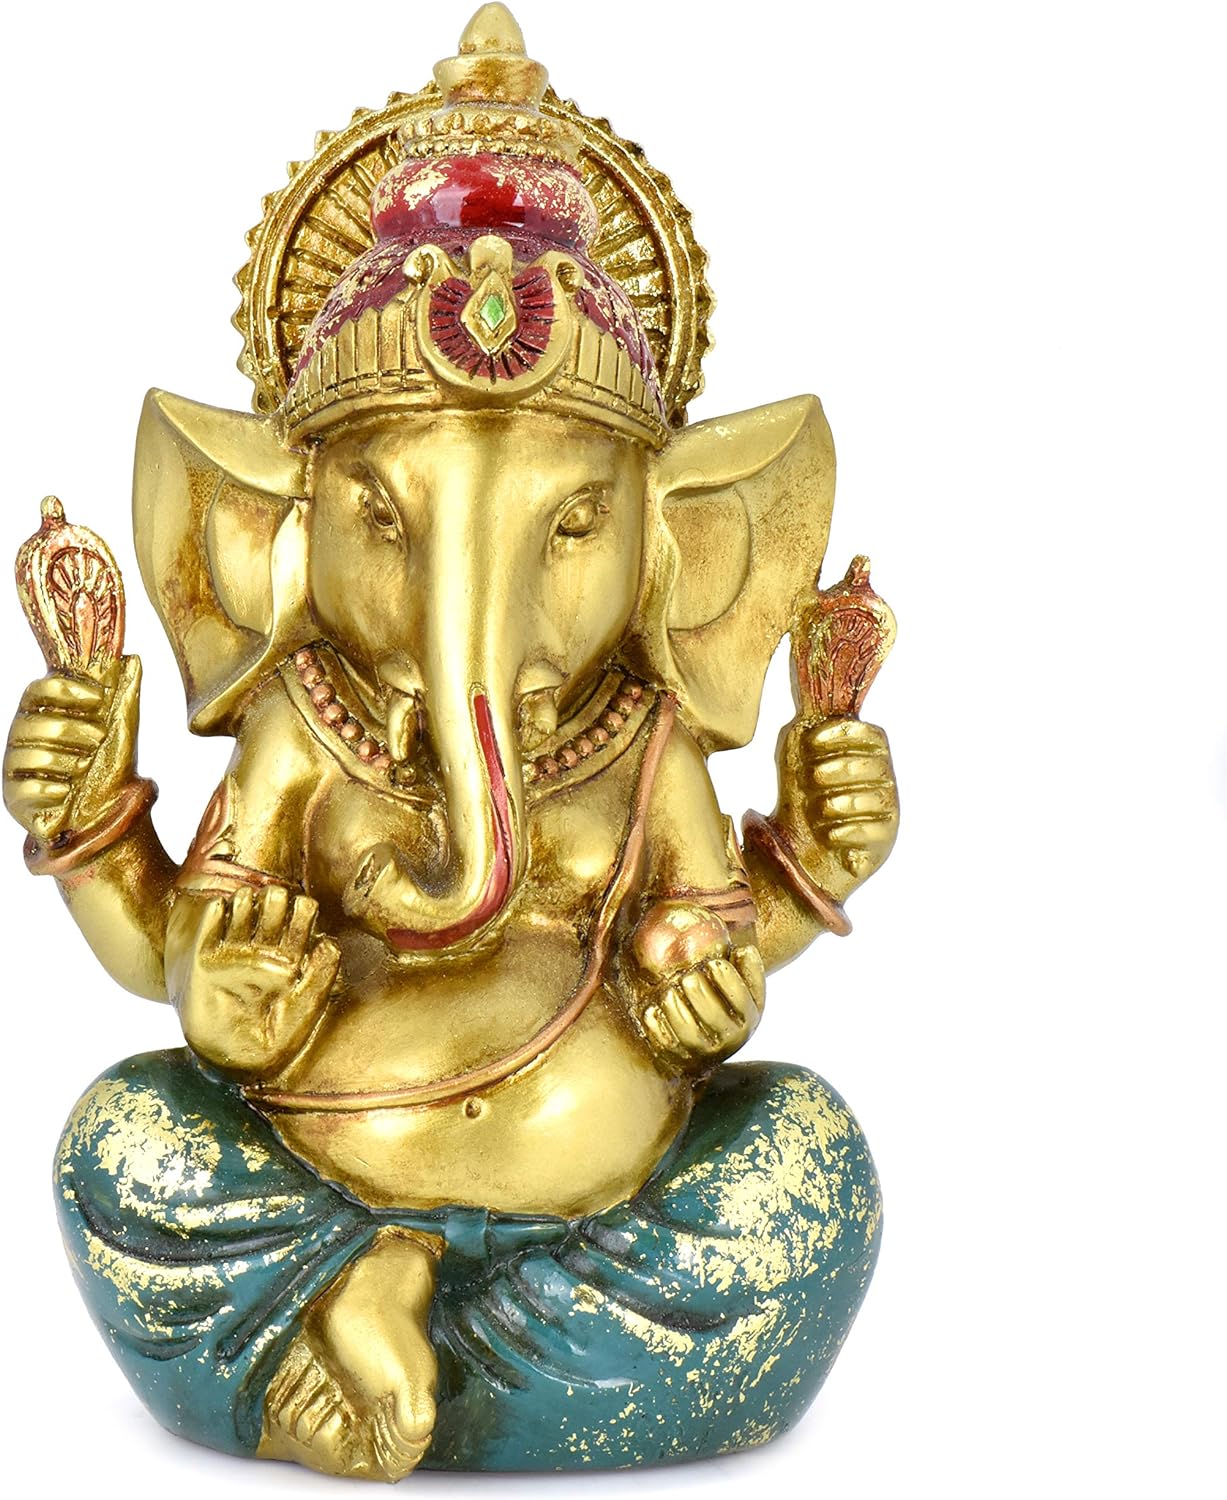 Ganesha Statue Elephant Hindu God of Success Large 9.5-inch-tall Resin Ganesh Idol Hand-Painted in Gold Indian Decor India Gift for Wedding and Diwali Decoration